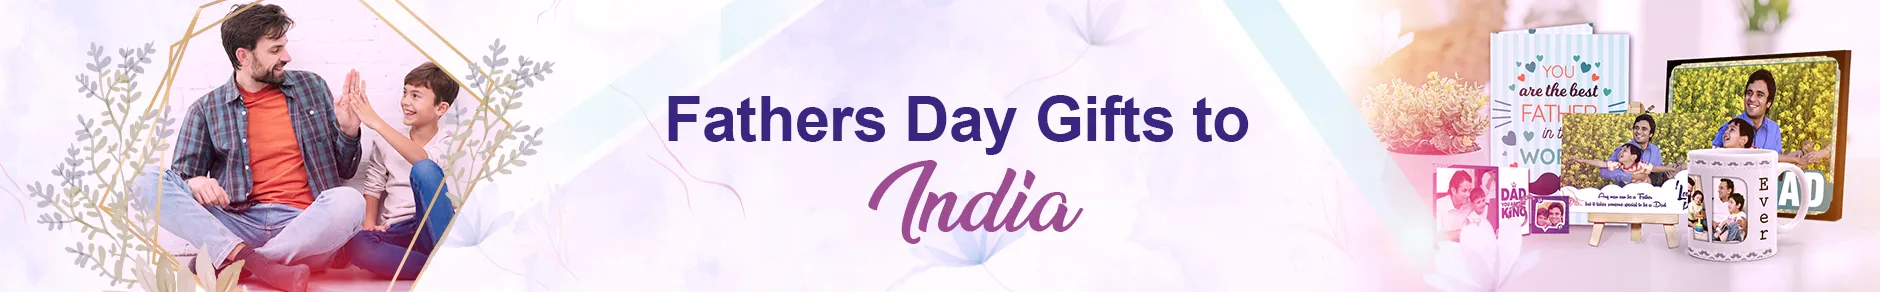 Send Father's Day Gifts Online in India